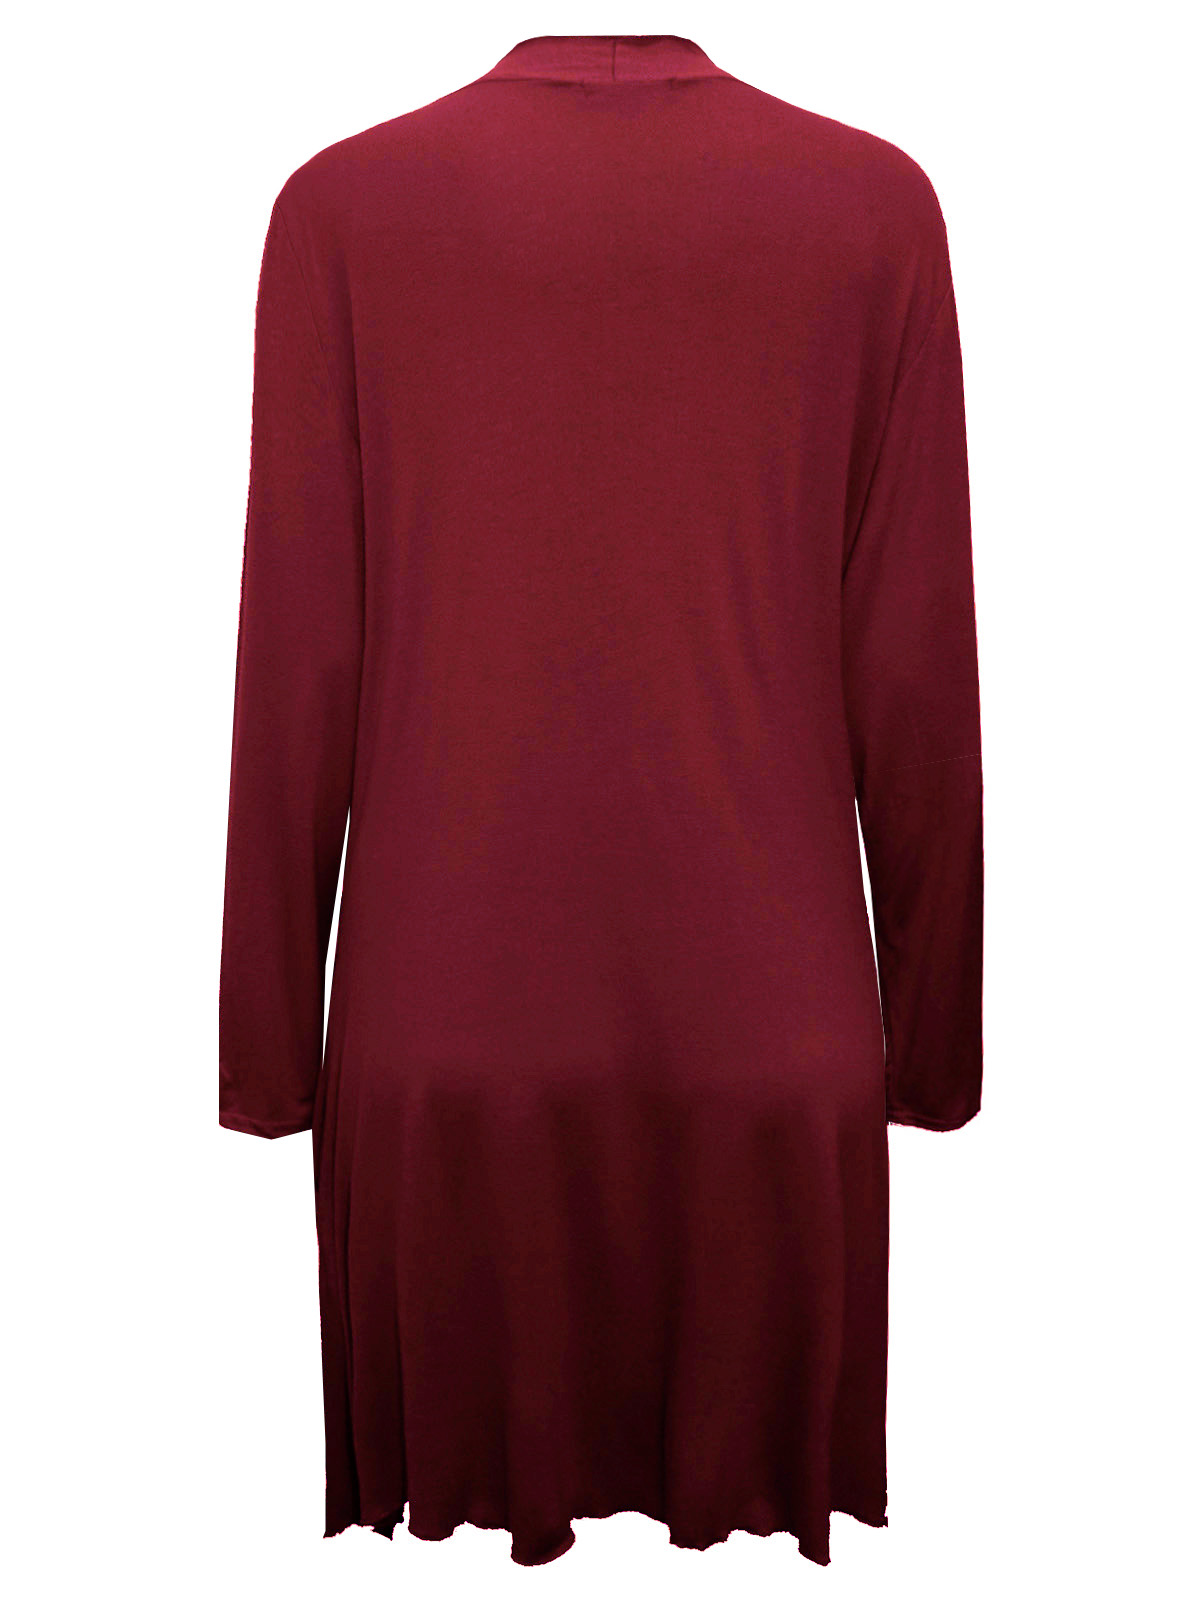 //text.. - - CLARET Open Front Long Sleeve Jersey Cardigan w/Pockets ...